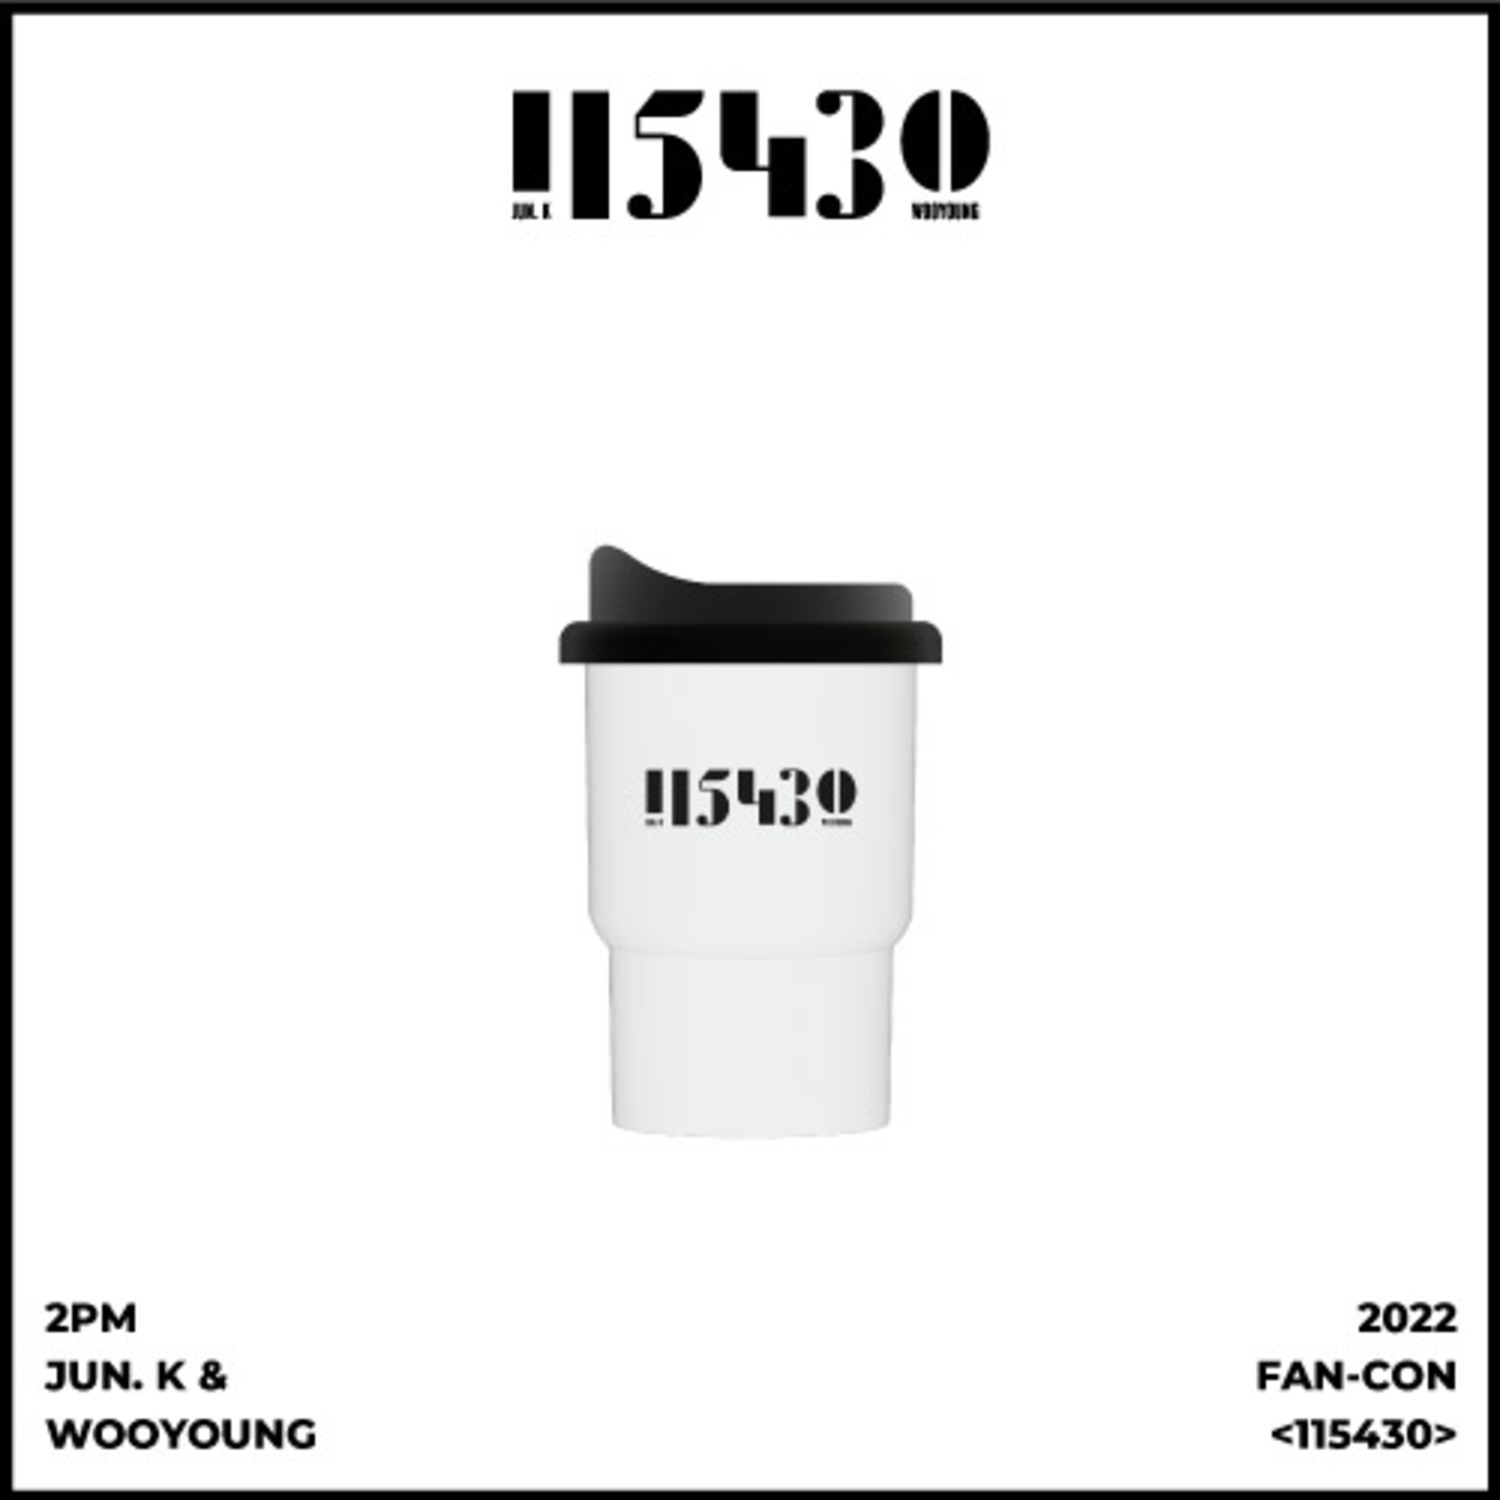 2PM JUN. K &amp; WOOYOUNG 2022 FAN-CON [115430] OFFICIAL GOODS 리유저블컵 REUSABLE CUP